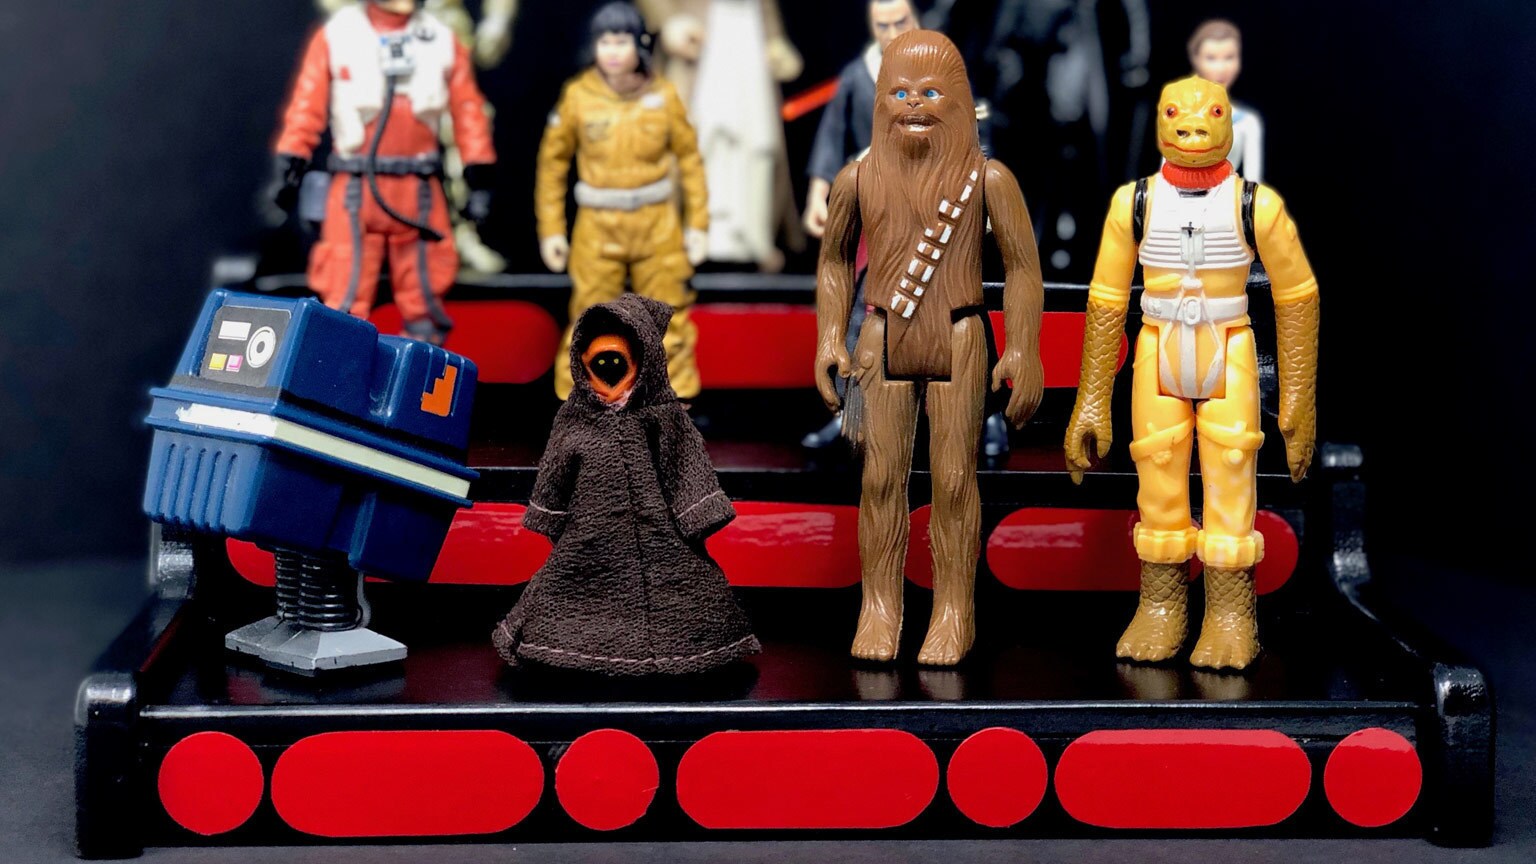 Make Your Star Wars Collection Look Most Impressive with This DIY Display Stand